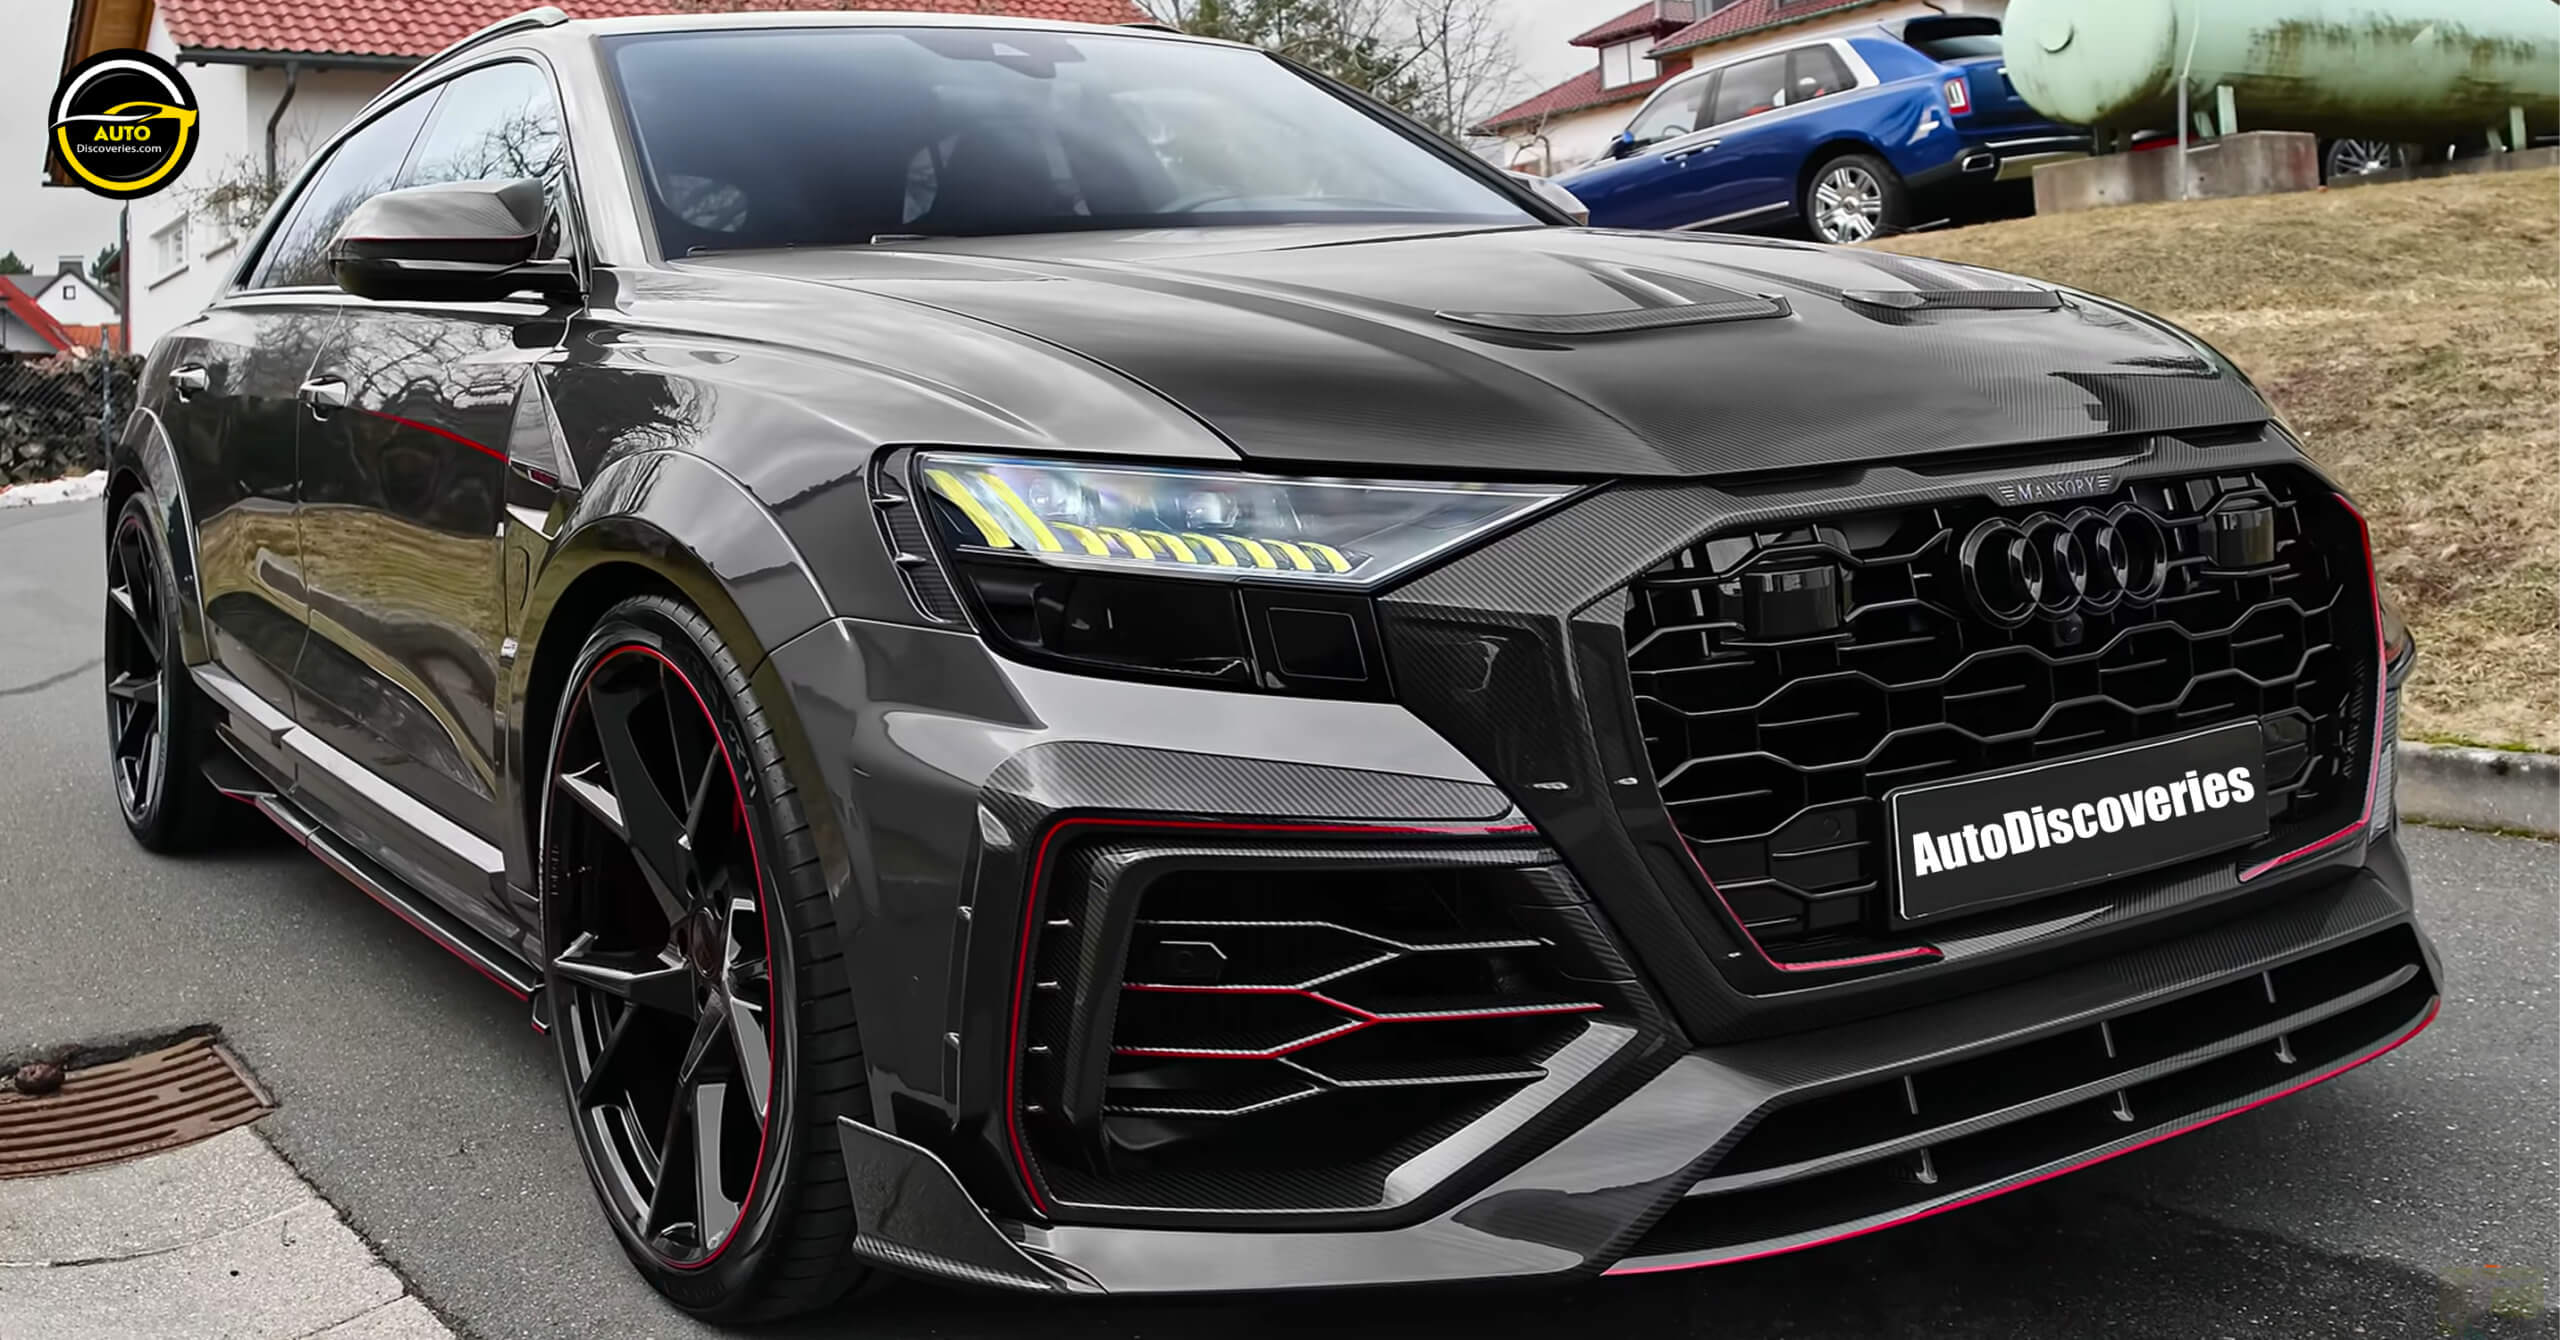 2022 AUDI RS Q8 P780 - New Wild SUV From MANSORY - Auto Discoveries